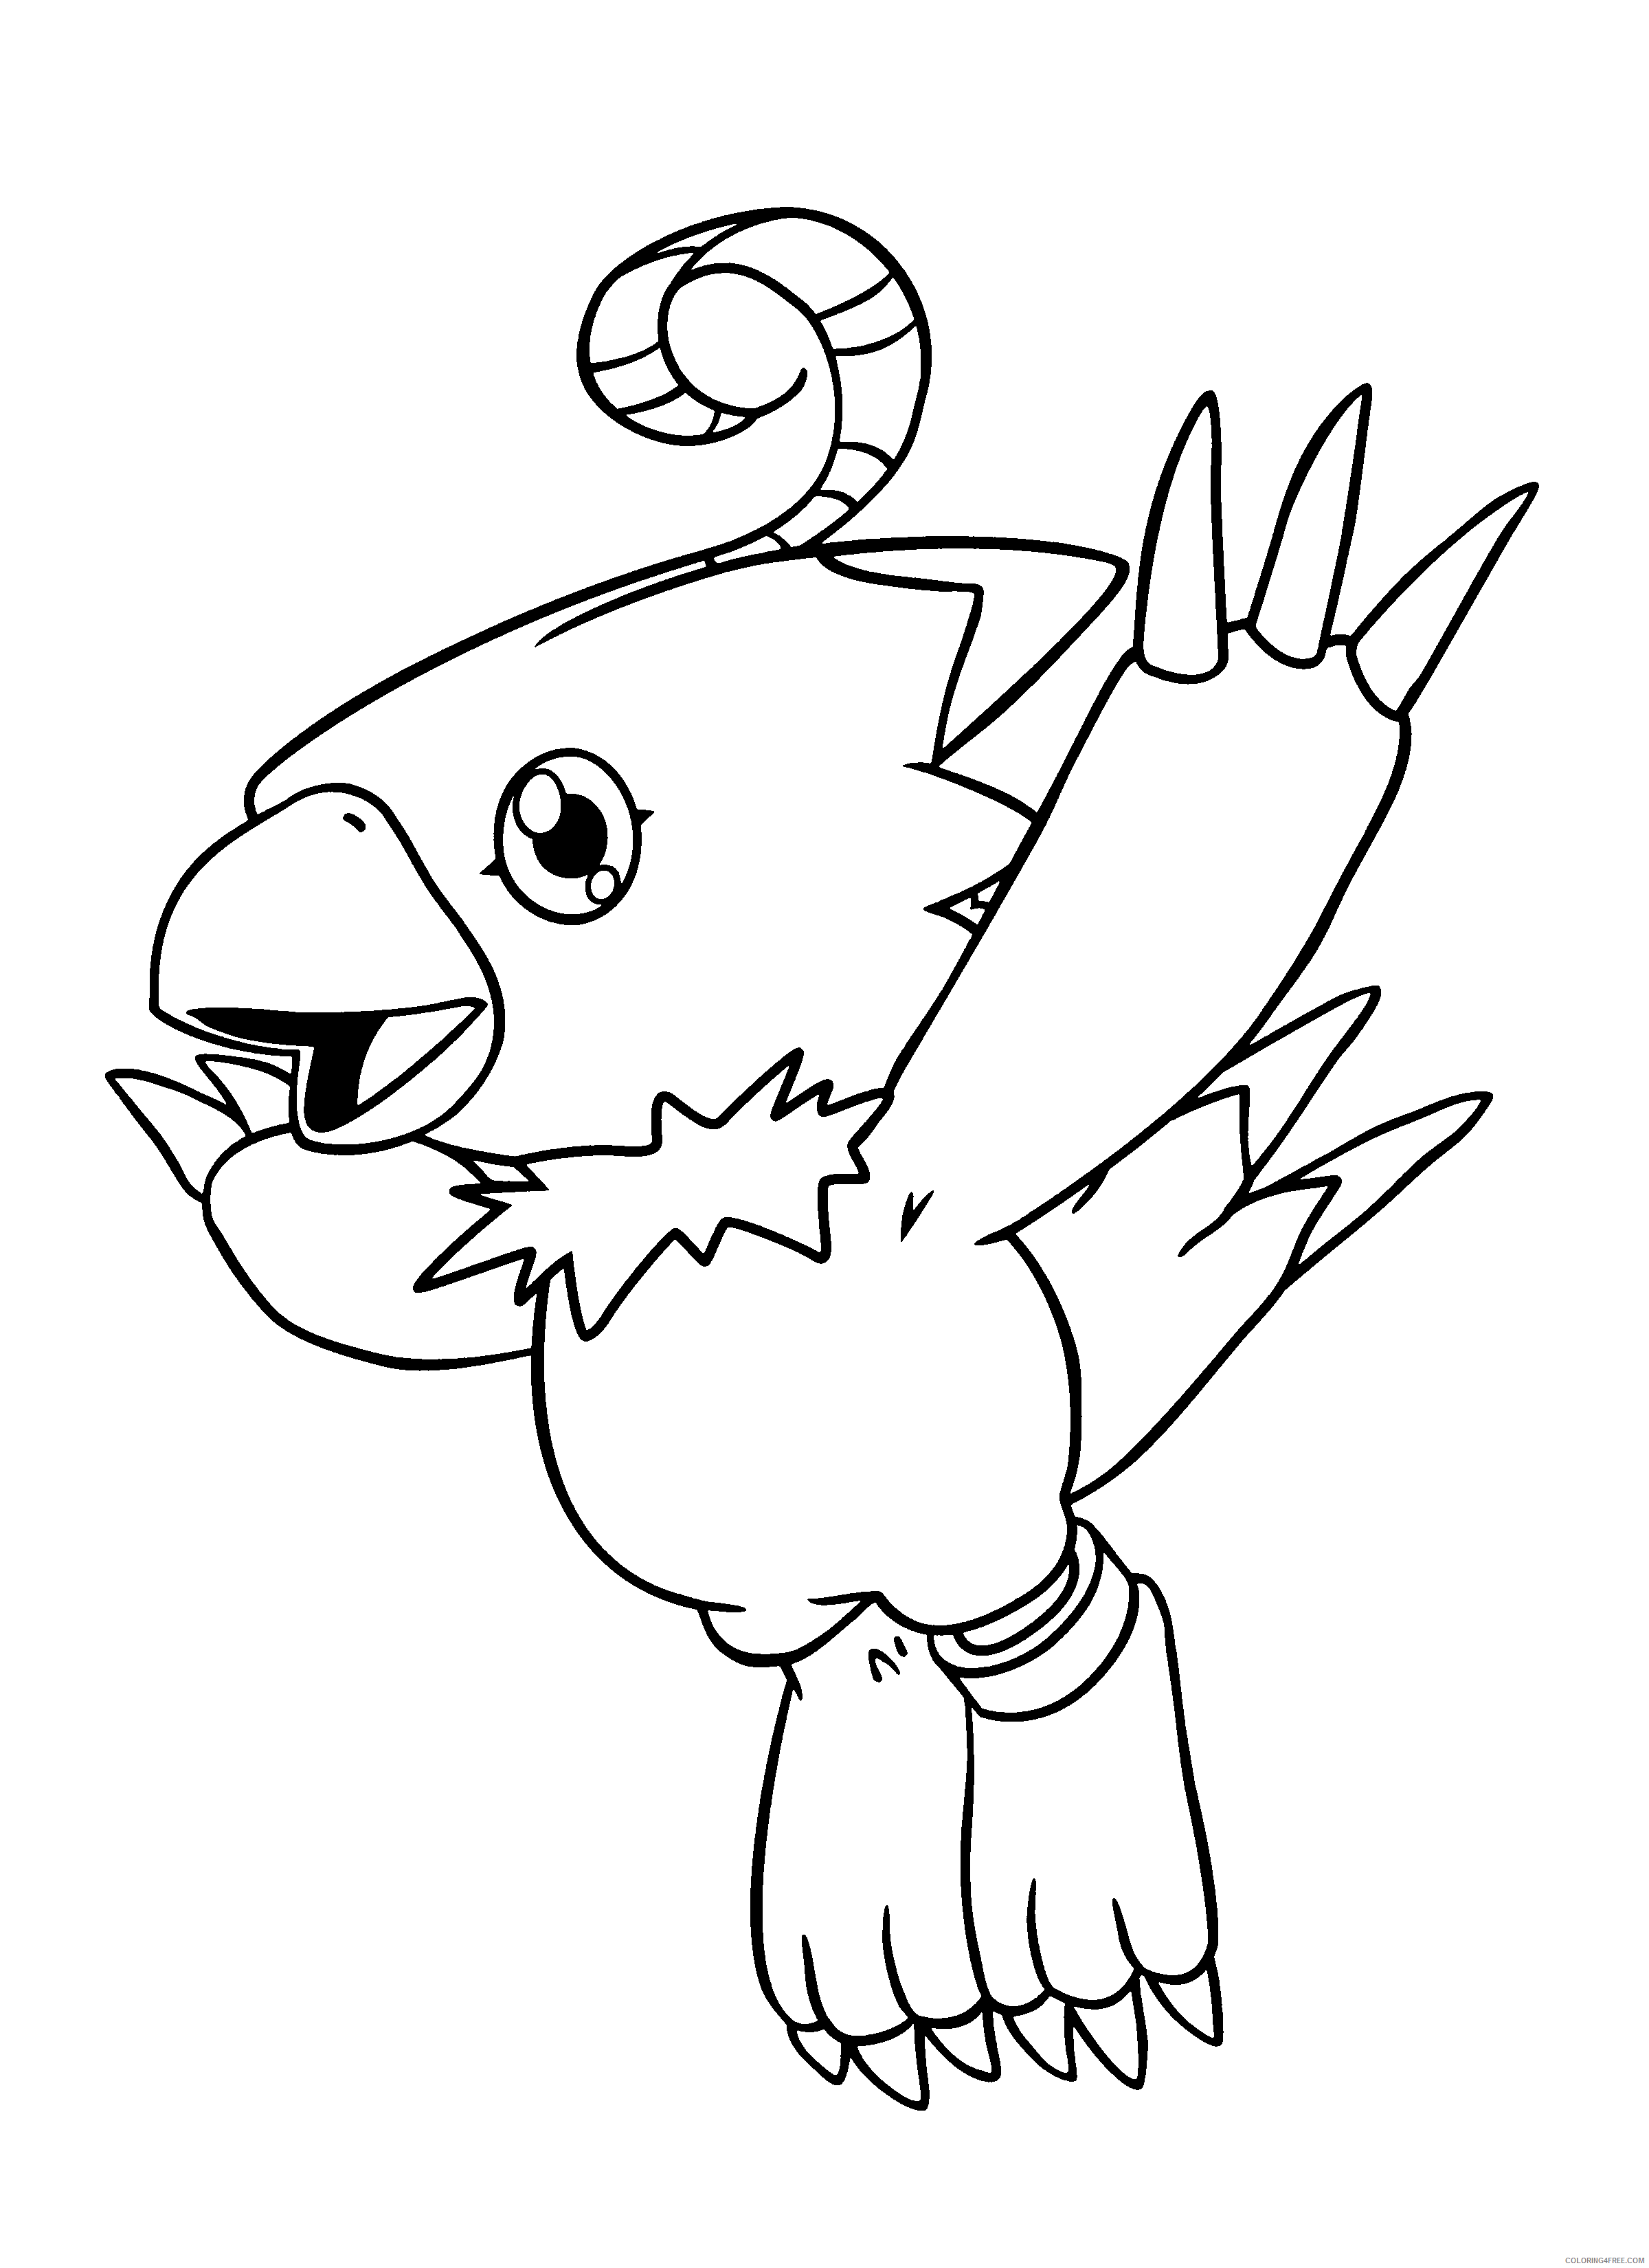 Digimon Printable Coloring Pages Anime digimon 227 2021 0310 Coloring4free